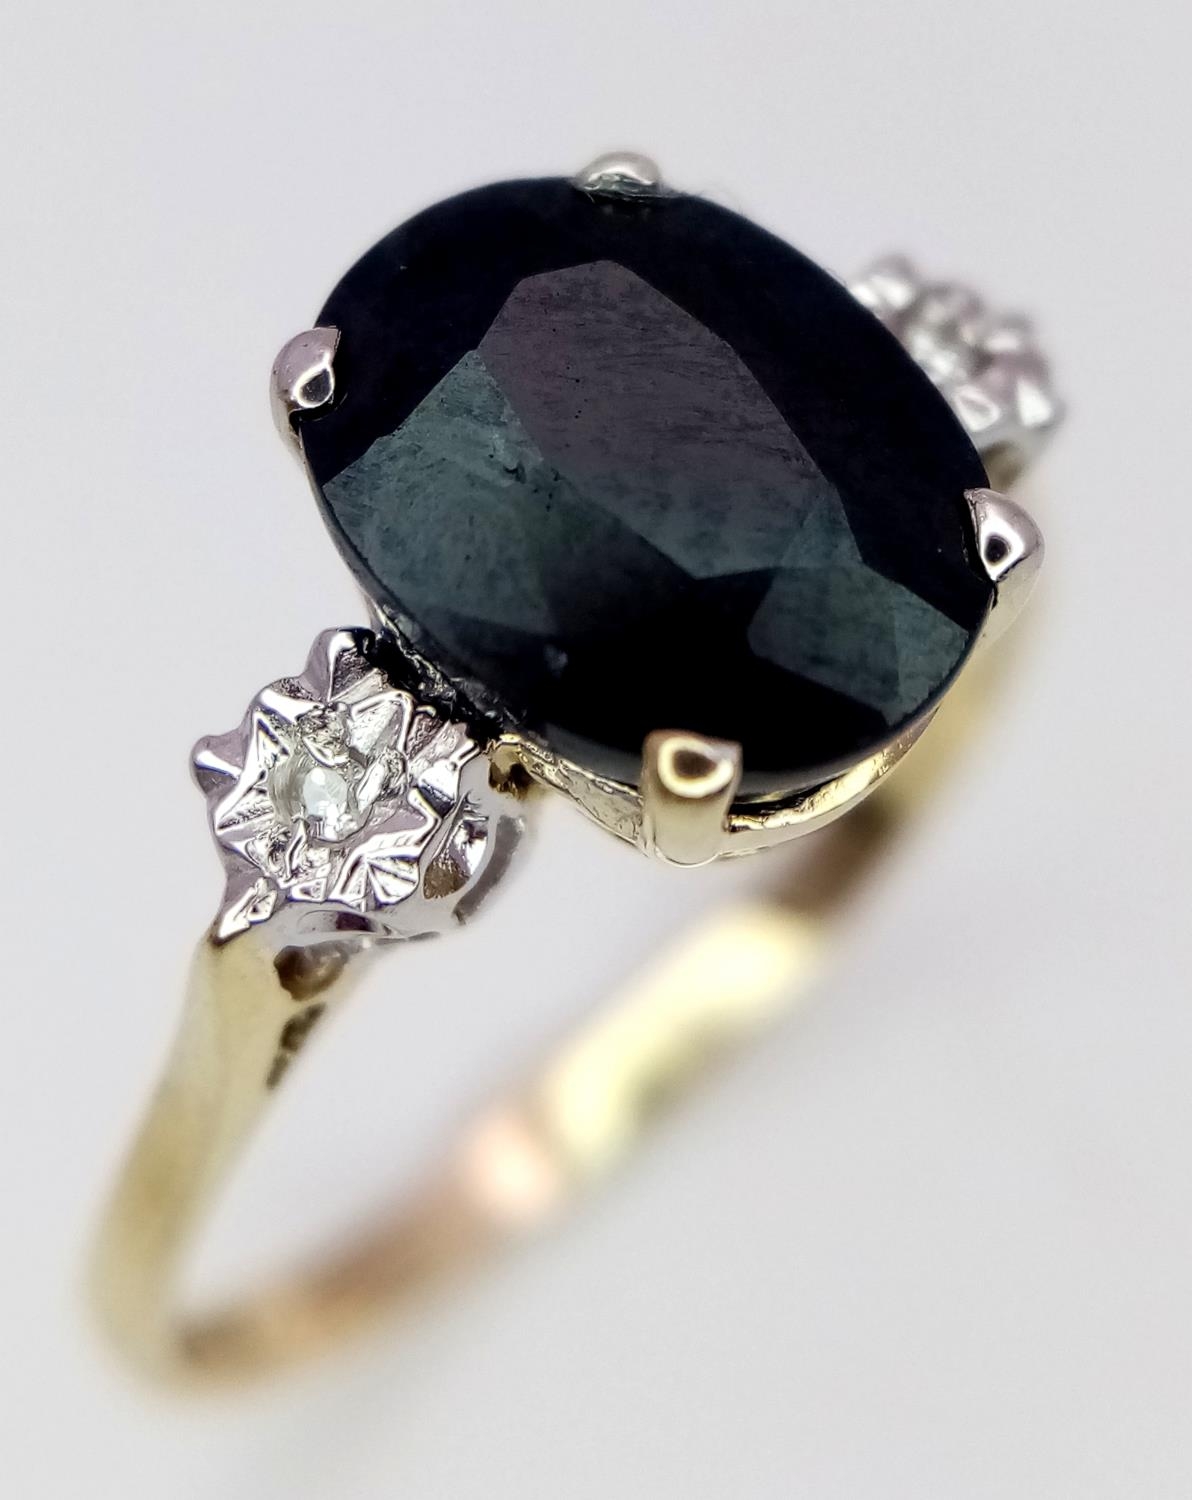 A 9K YELLOW GOLD DIAMOND & SAPPHIRE RING 1.50CT DARK BLUE OVAL SAPPHIRE 1.7G SIZE N SPAS 9016 - Image 2 of 4